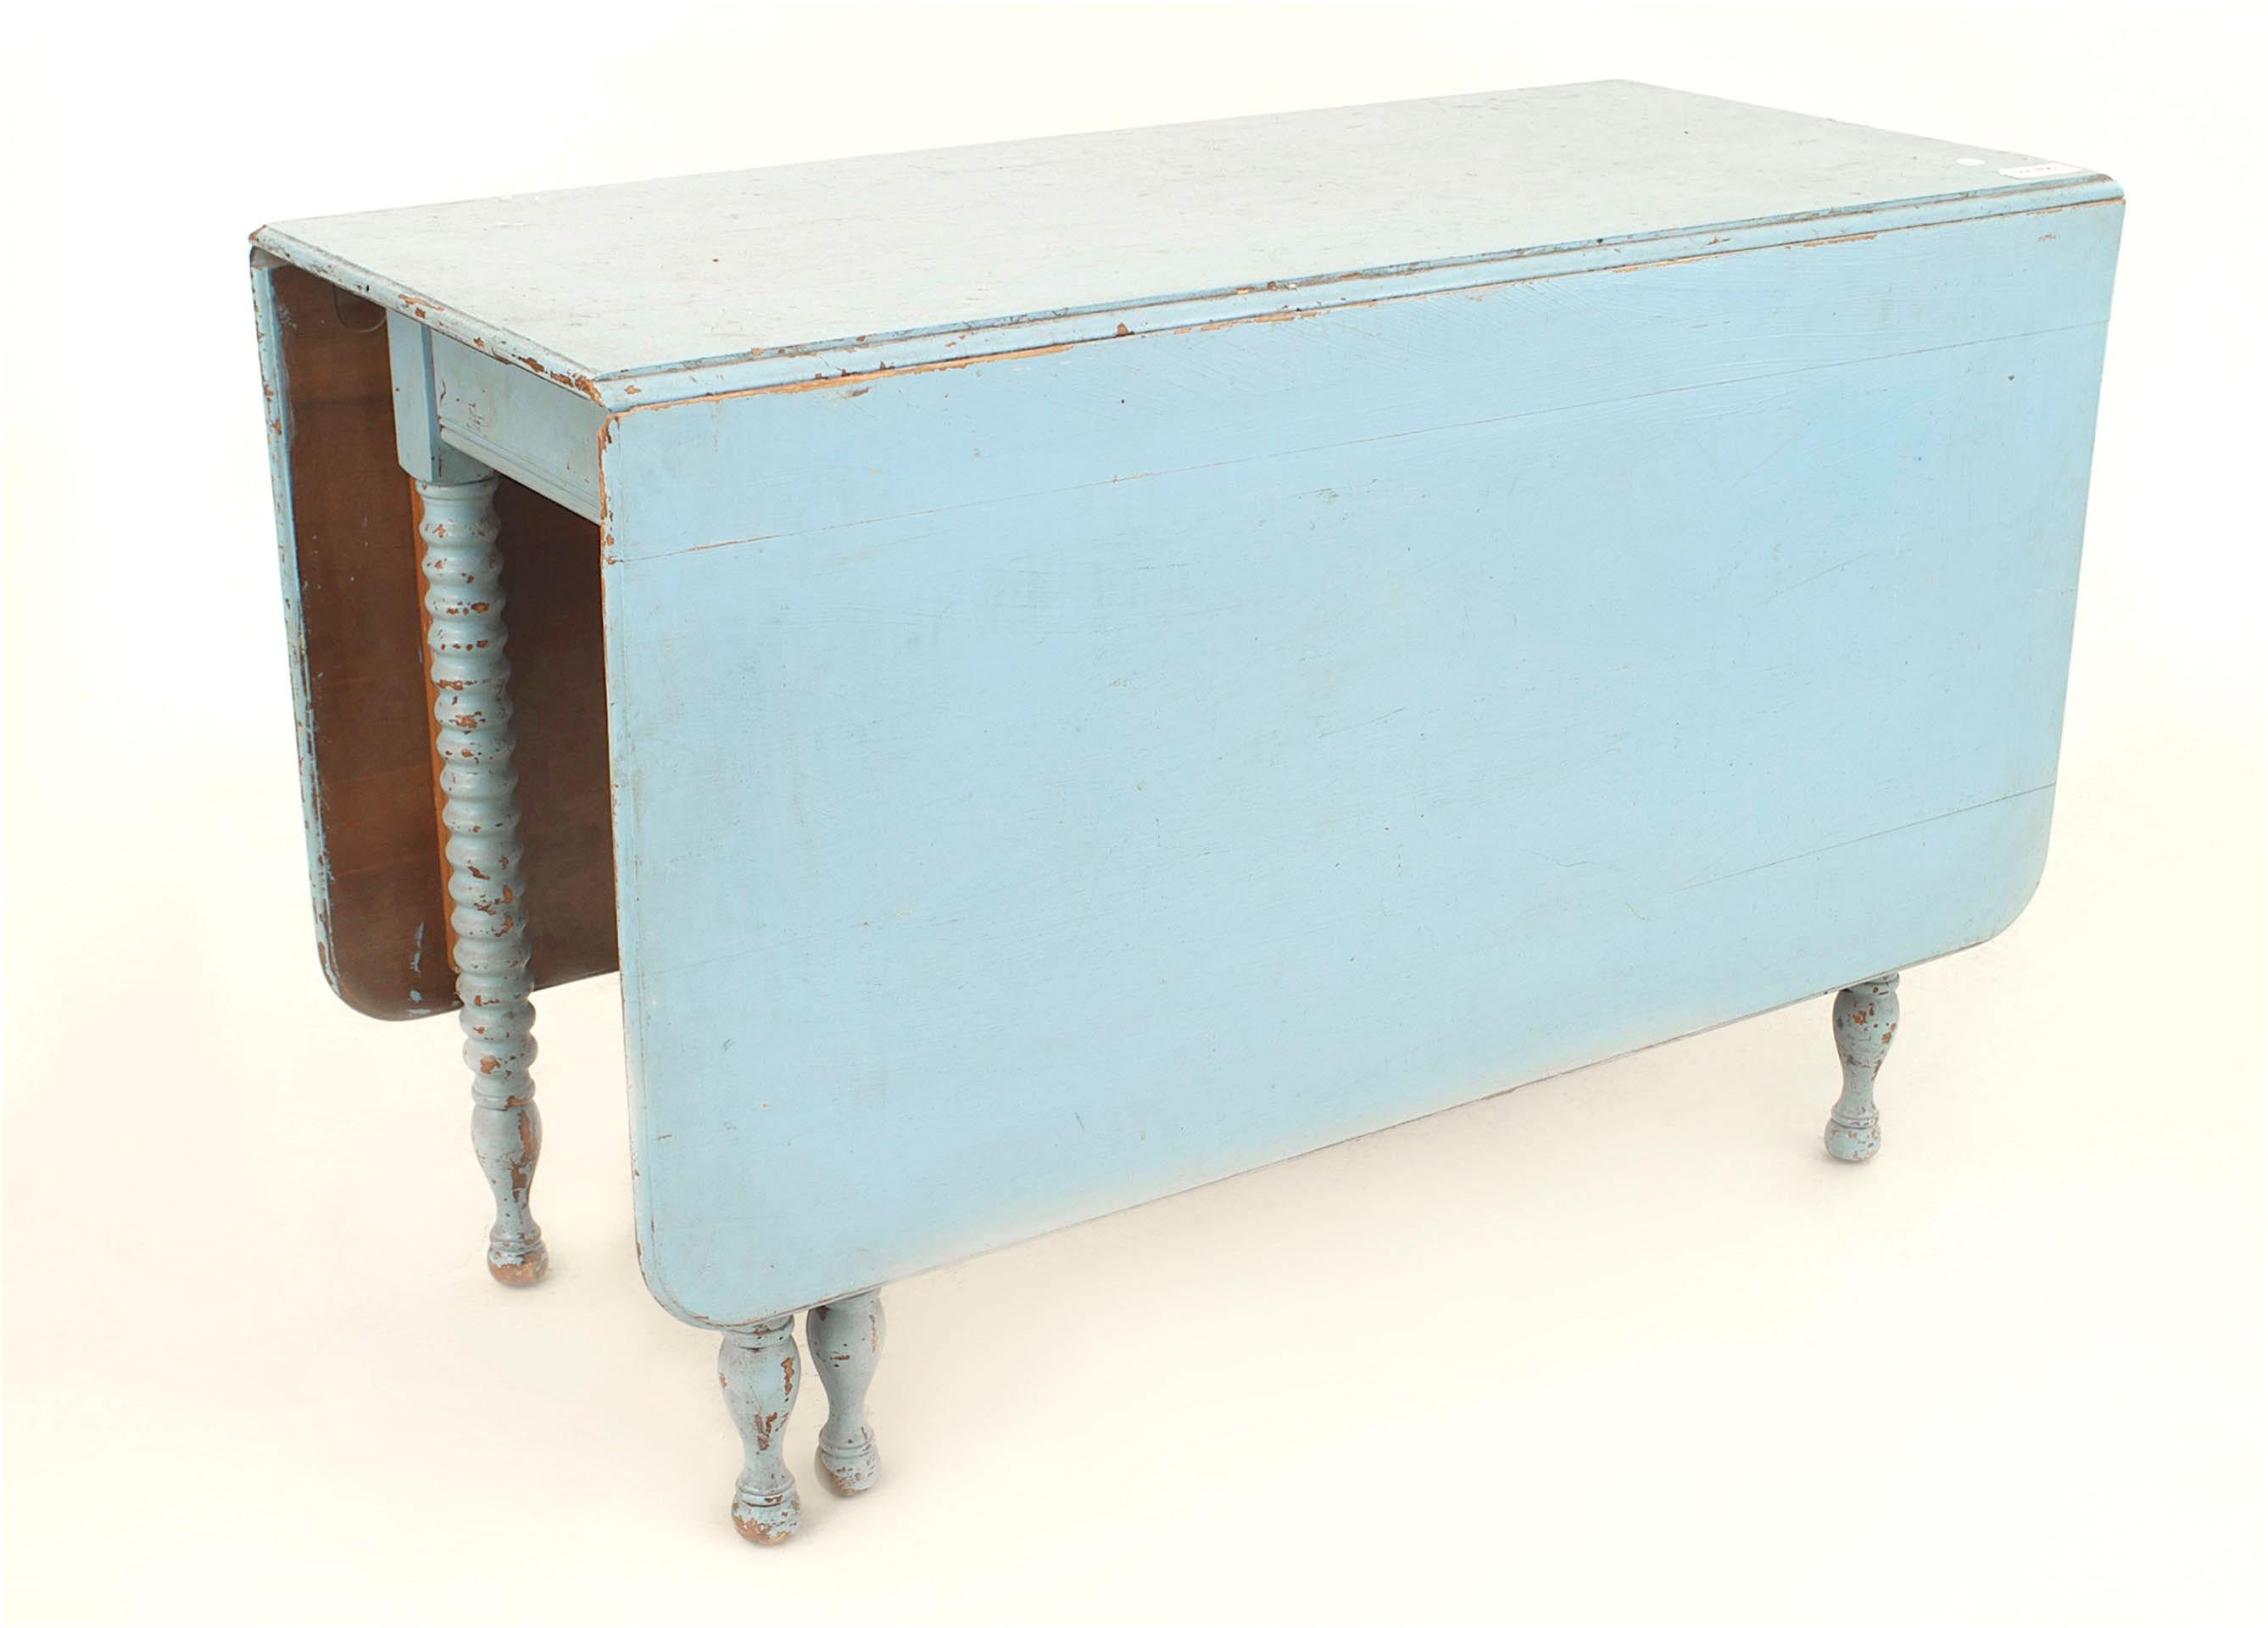 American Country Rustic-Style (19th Century) rectangular antique blue painted drop leaf table dining with spool design legs.
